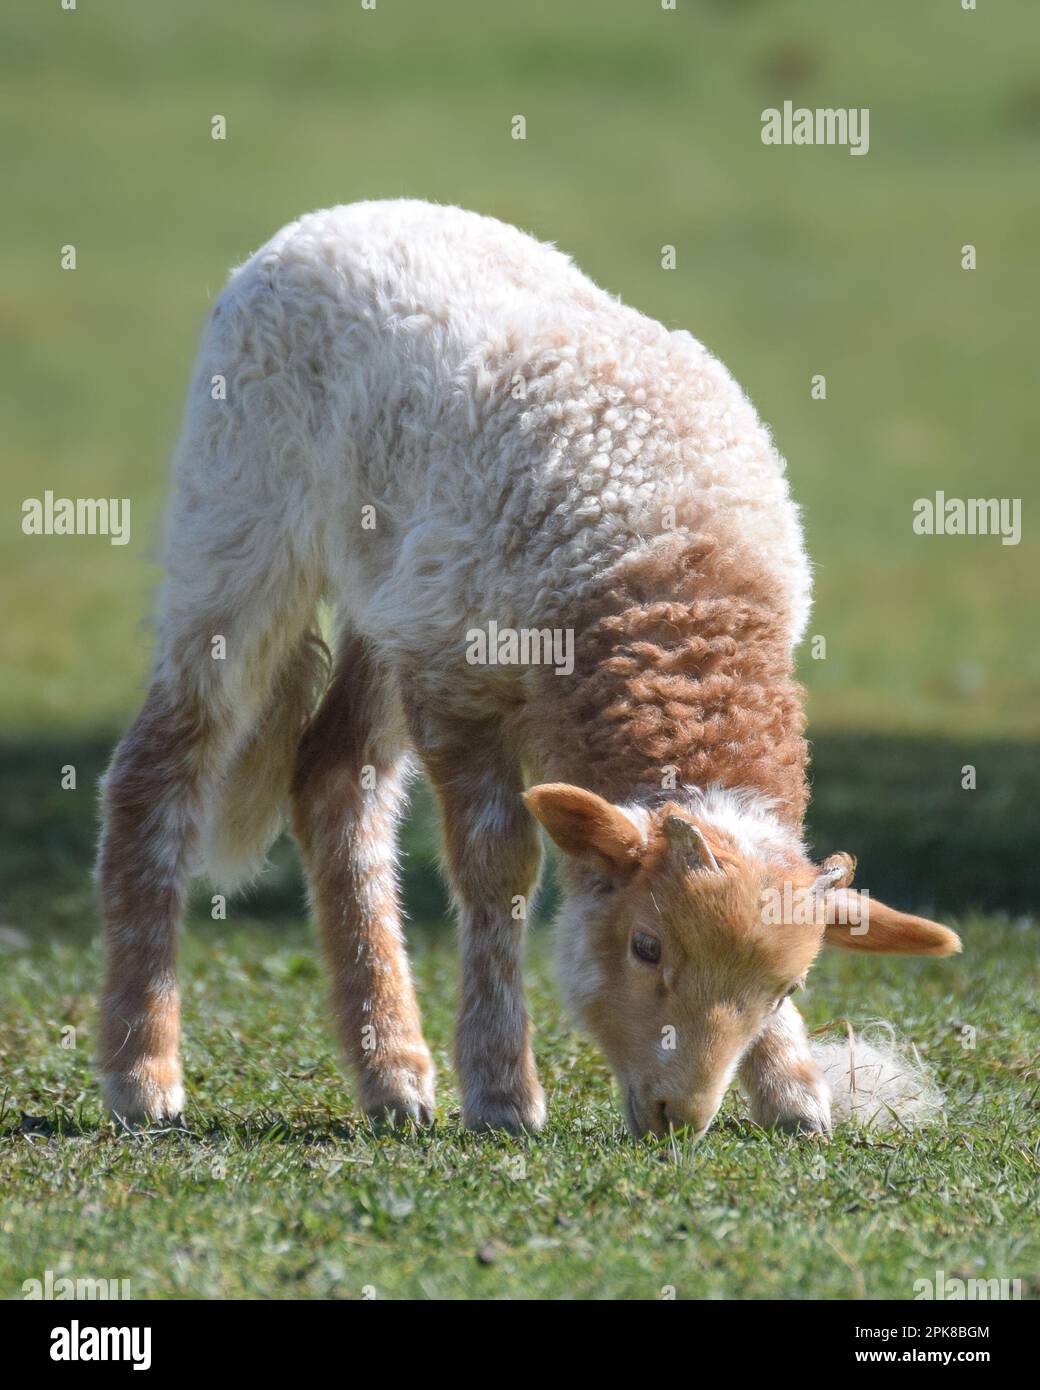 Cute newborn sheep (lambs) on a sunny day in spring Stock Photo